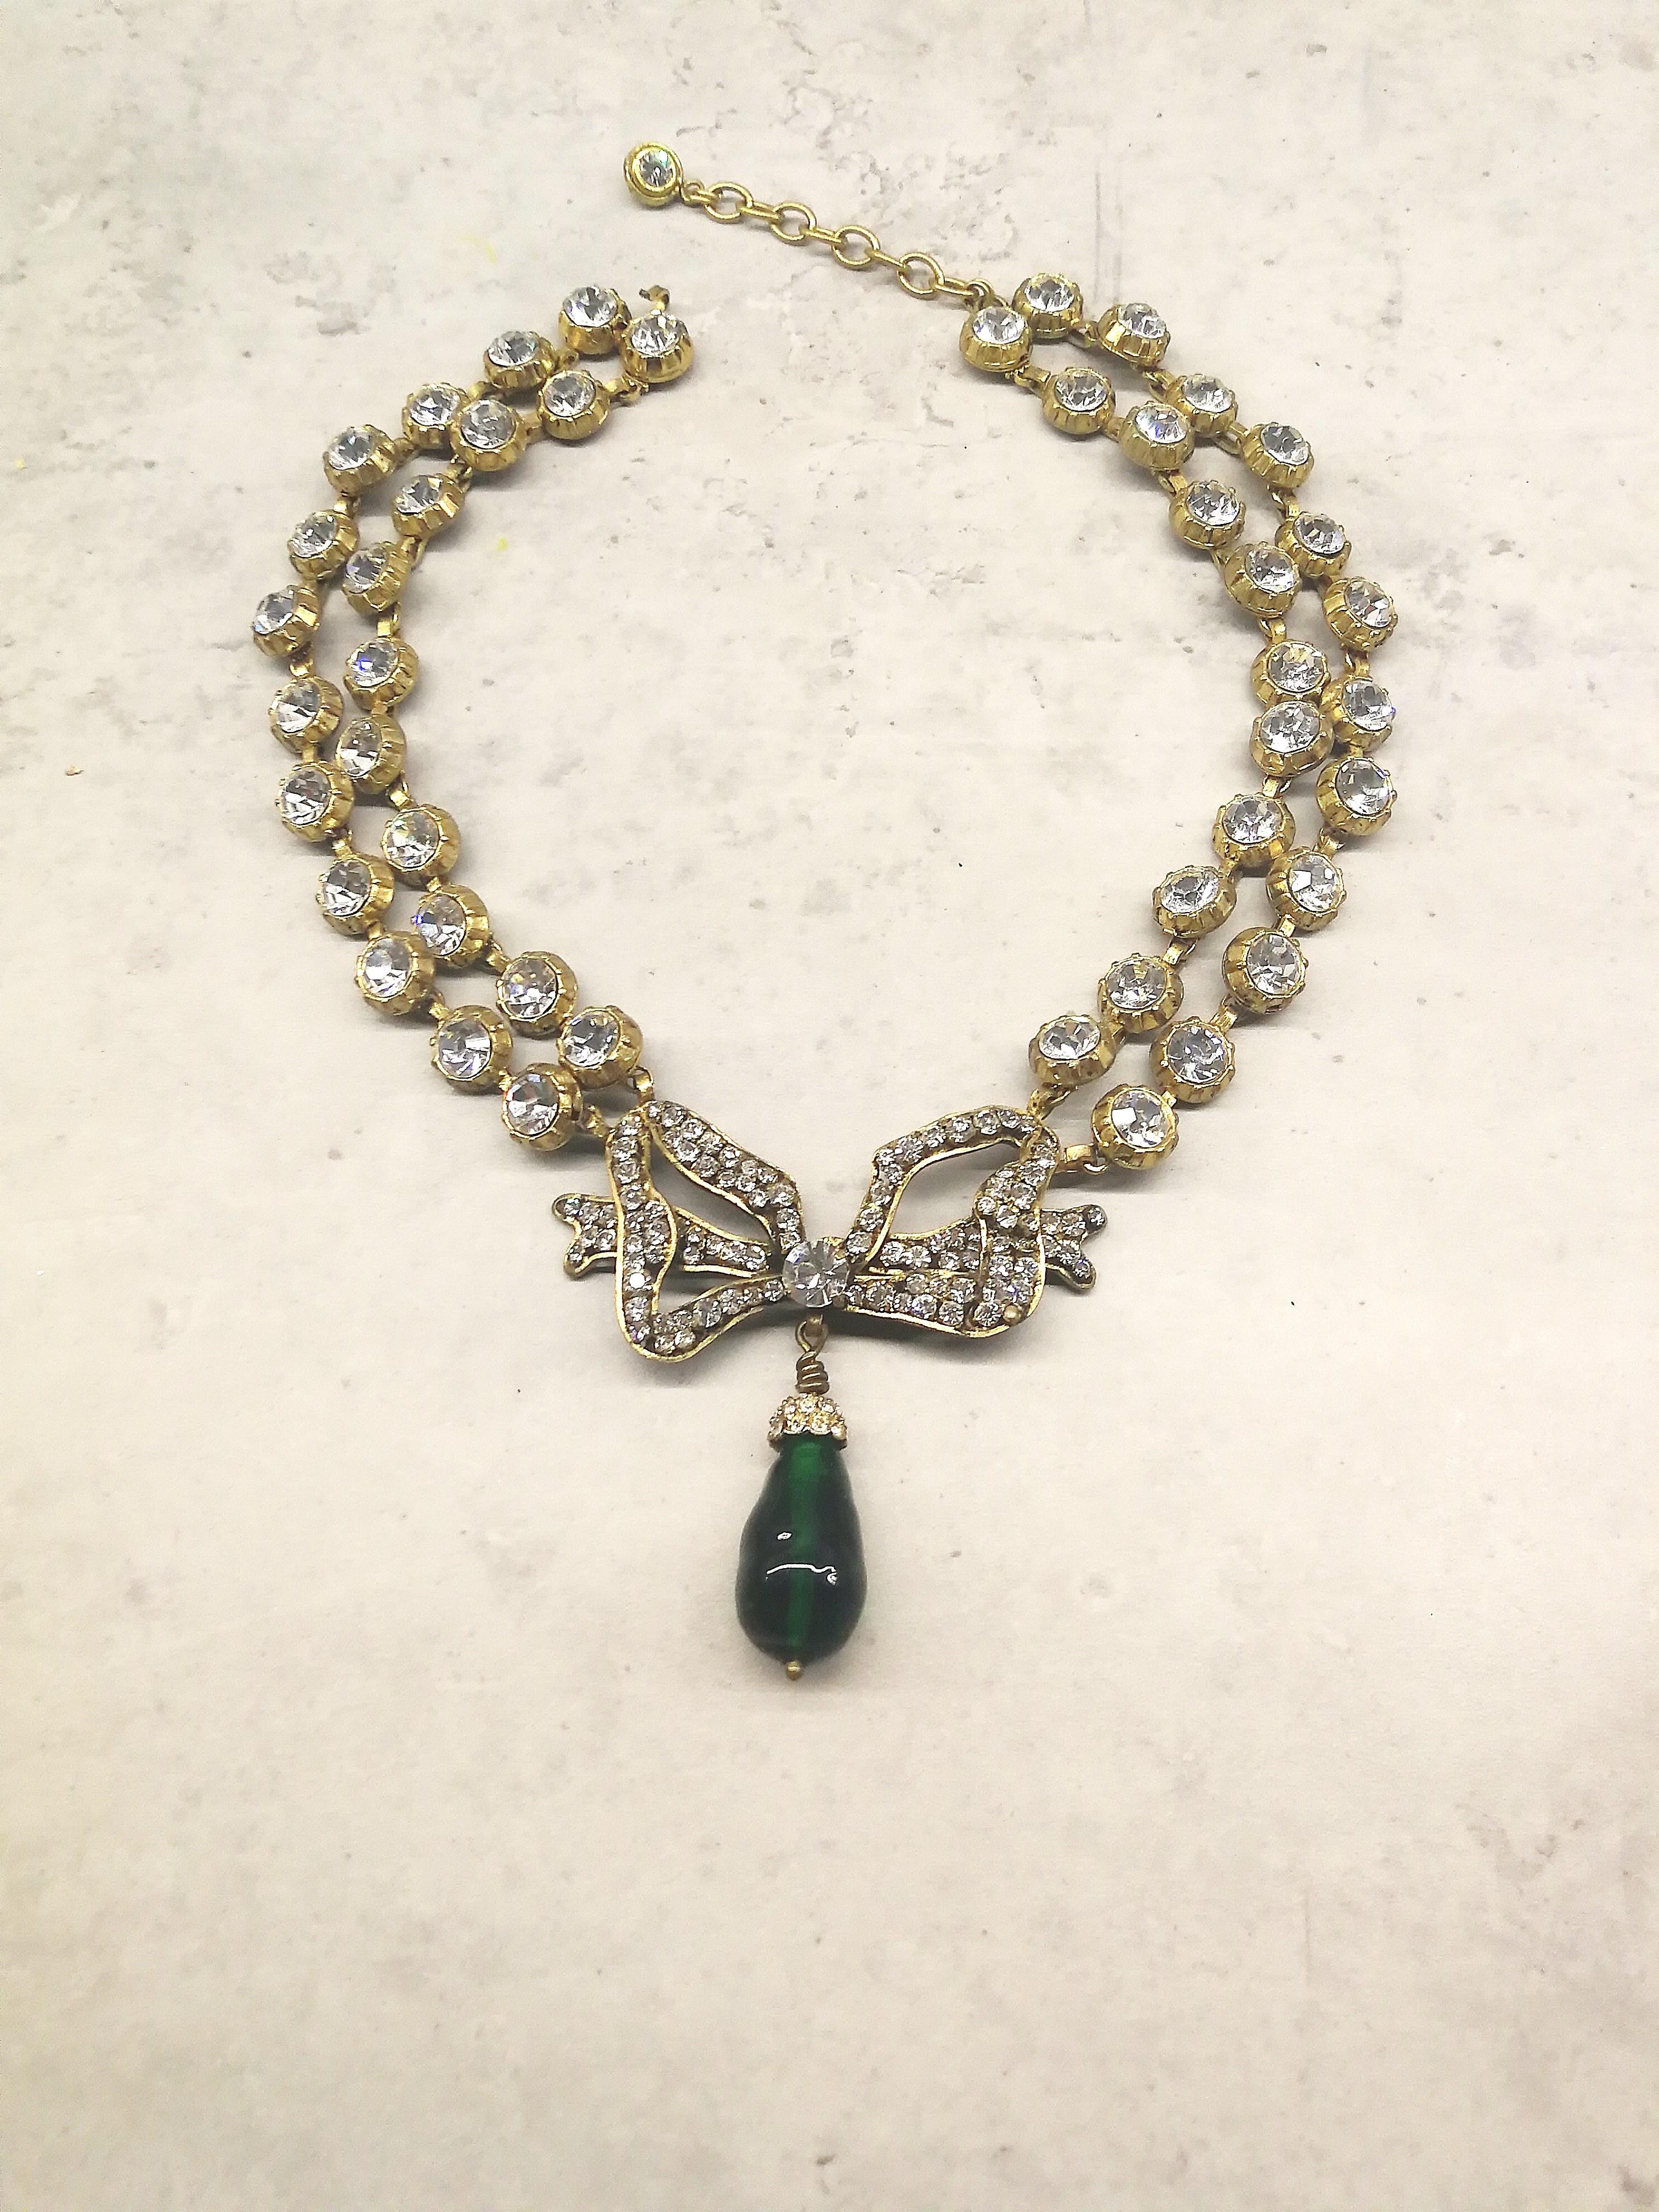 This stunning, classic necklace is made from clear pastes, in gilt metal settings, with a large paste bow as the centrepiece, from which hangs a large emerald poured glass drop. It is a perfect example of the long collaboration between Chanel and